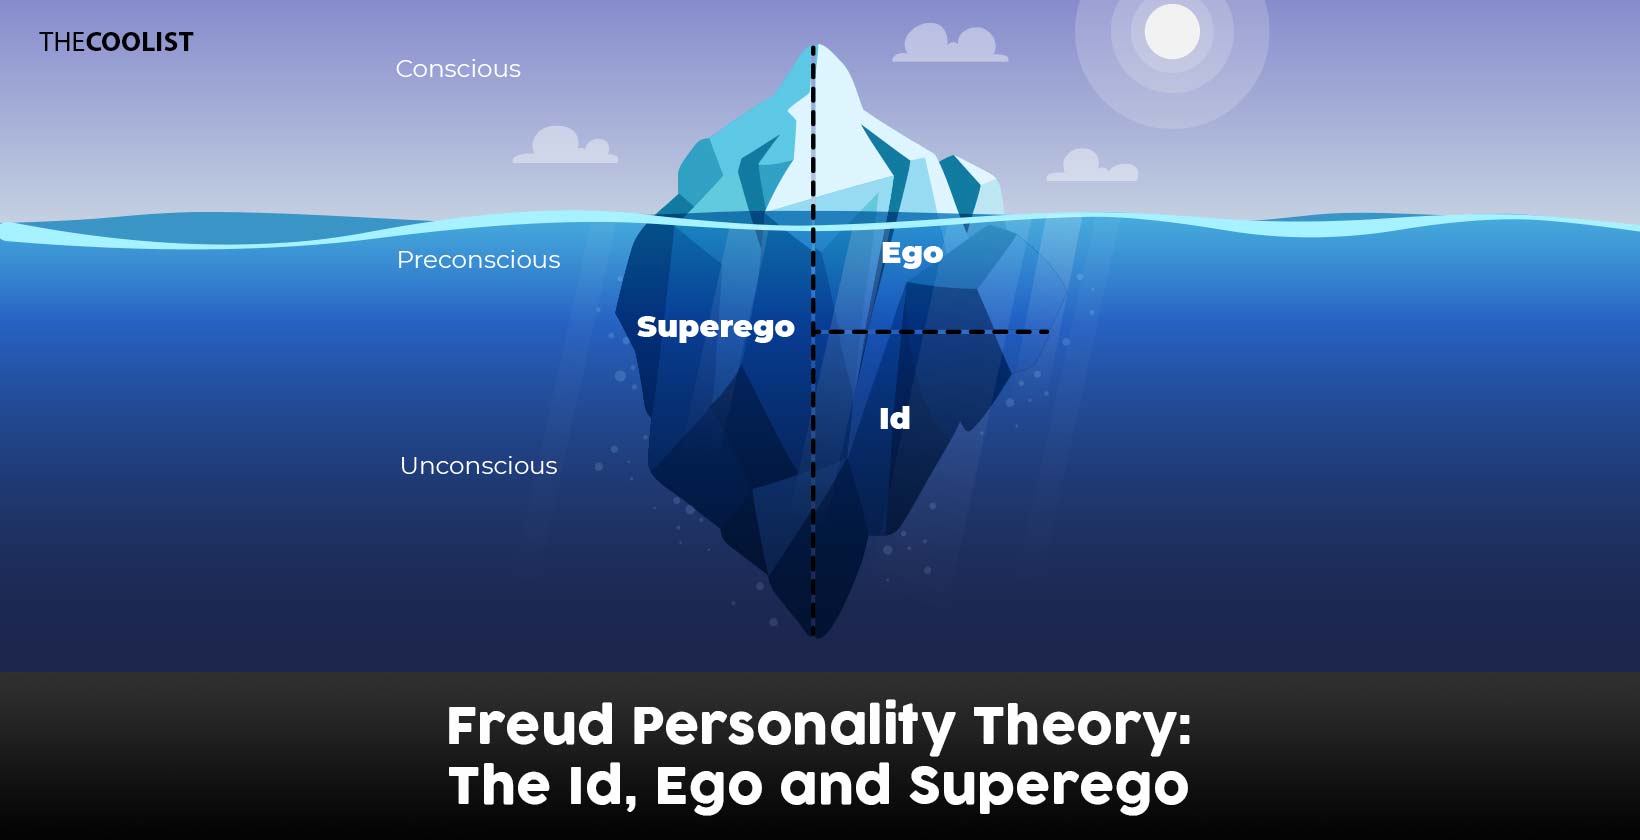 Freud Personality Theory: The Id, Ego, and Superego